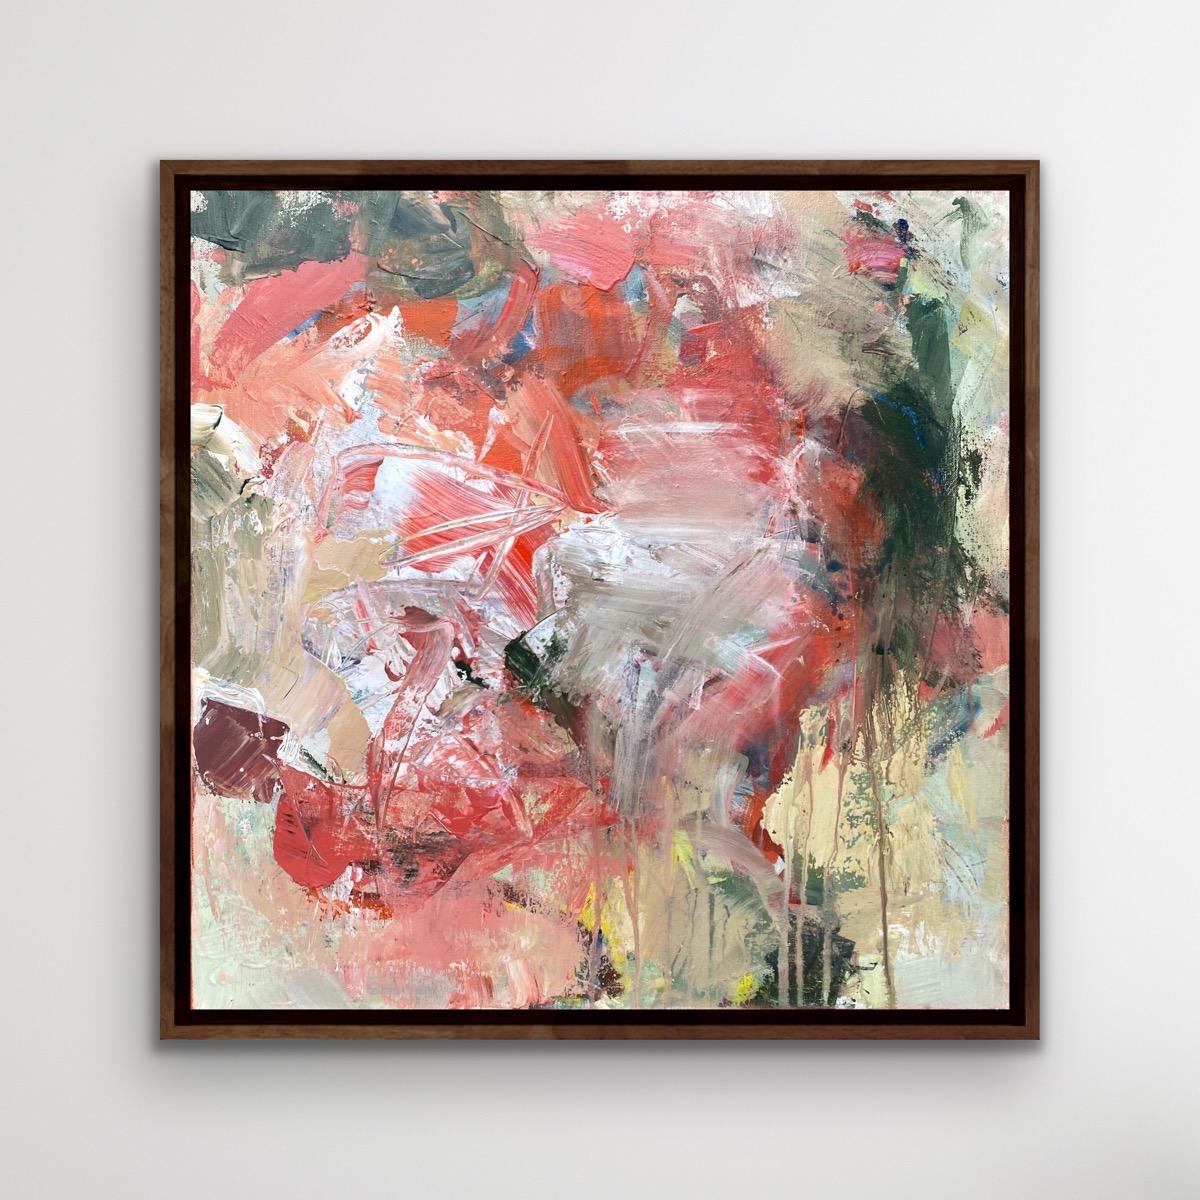 Warm, earthy colors energetically mix together for an intuitive and happy feel.
Michelle Marra is available online and in our gallery at Wychwood Art. I see in swaths of color, texture and light. I am inspired by the lyrical movement and biomorphic